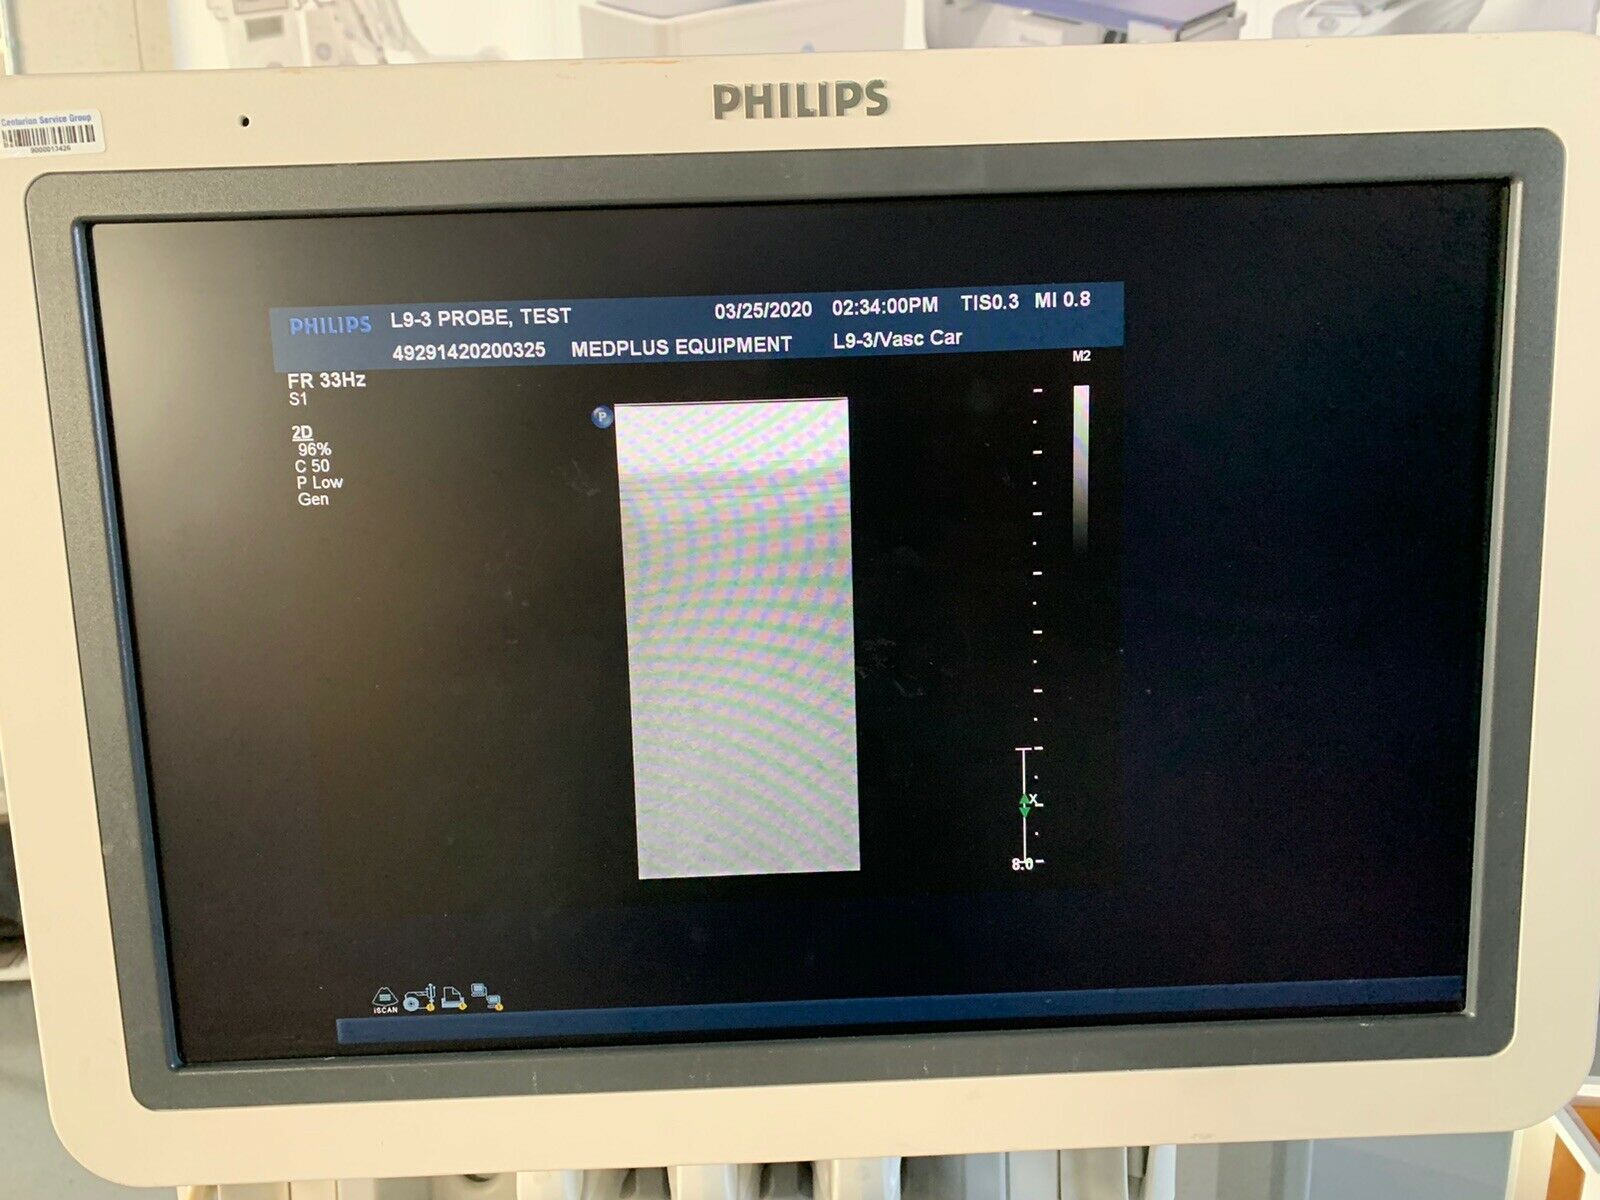 PHILIPS ULTRASOUND TRANSDUCER L9-3 PROBE, REMOVED FROM PHILIPS IU22 DIAGNOSTIC ULTRASOUND MACHINES FOR SALE